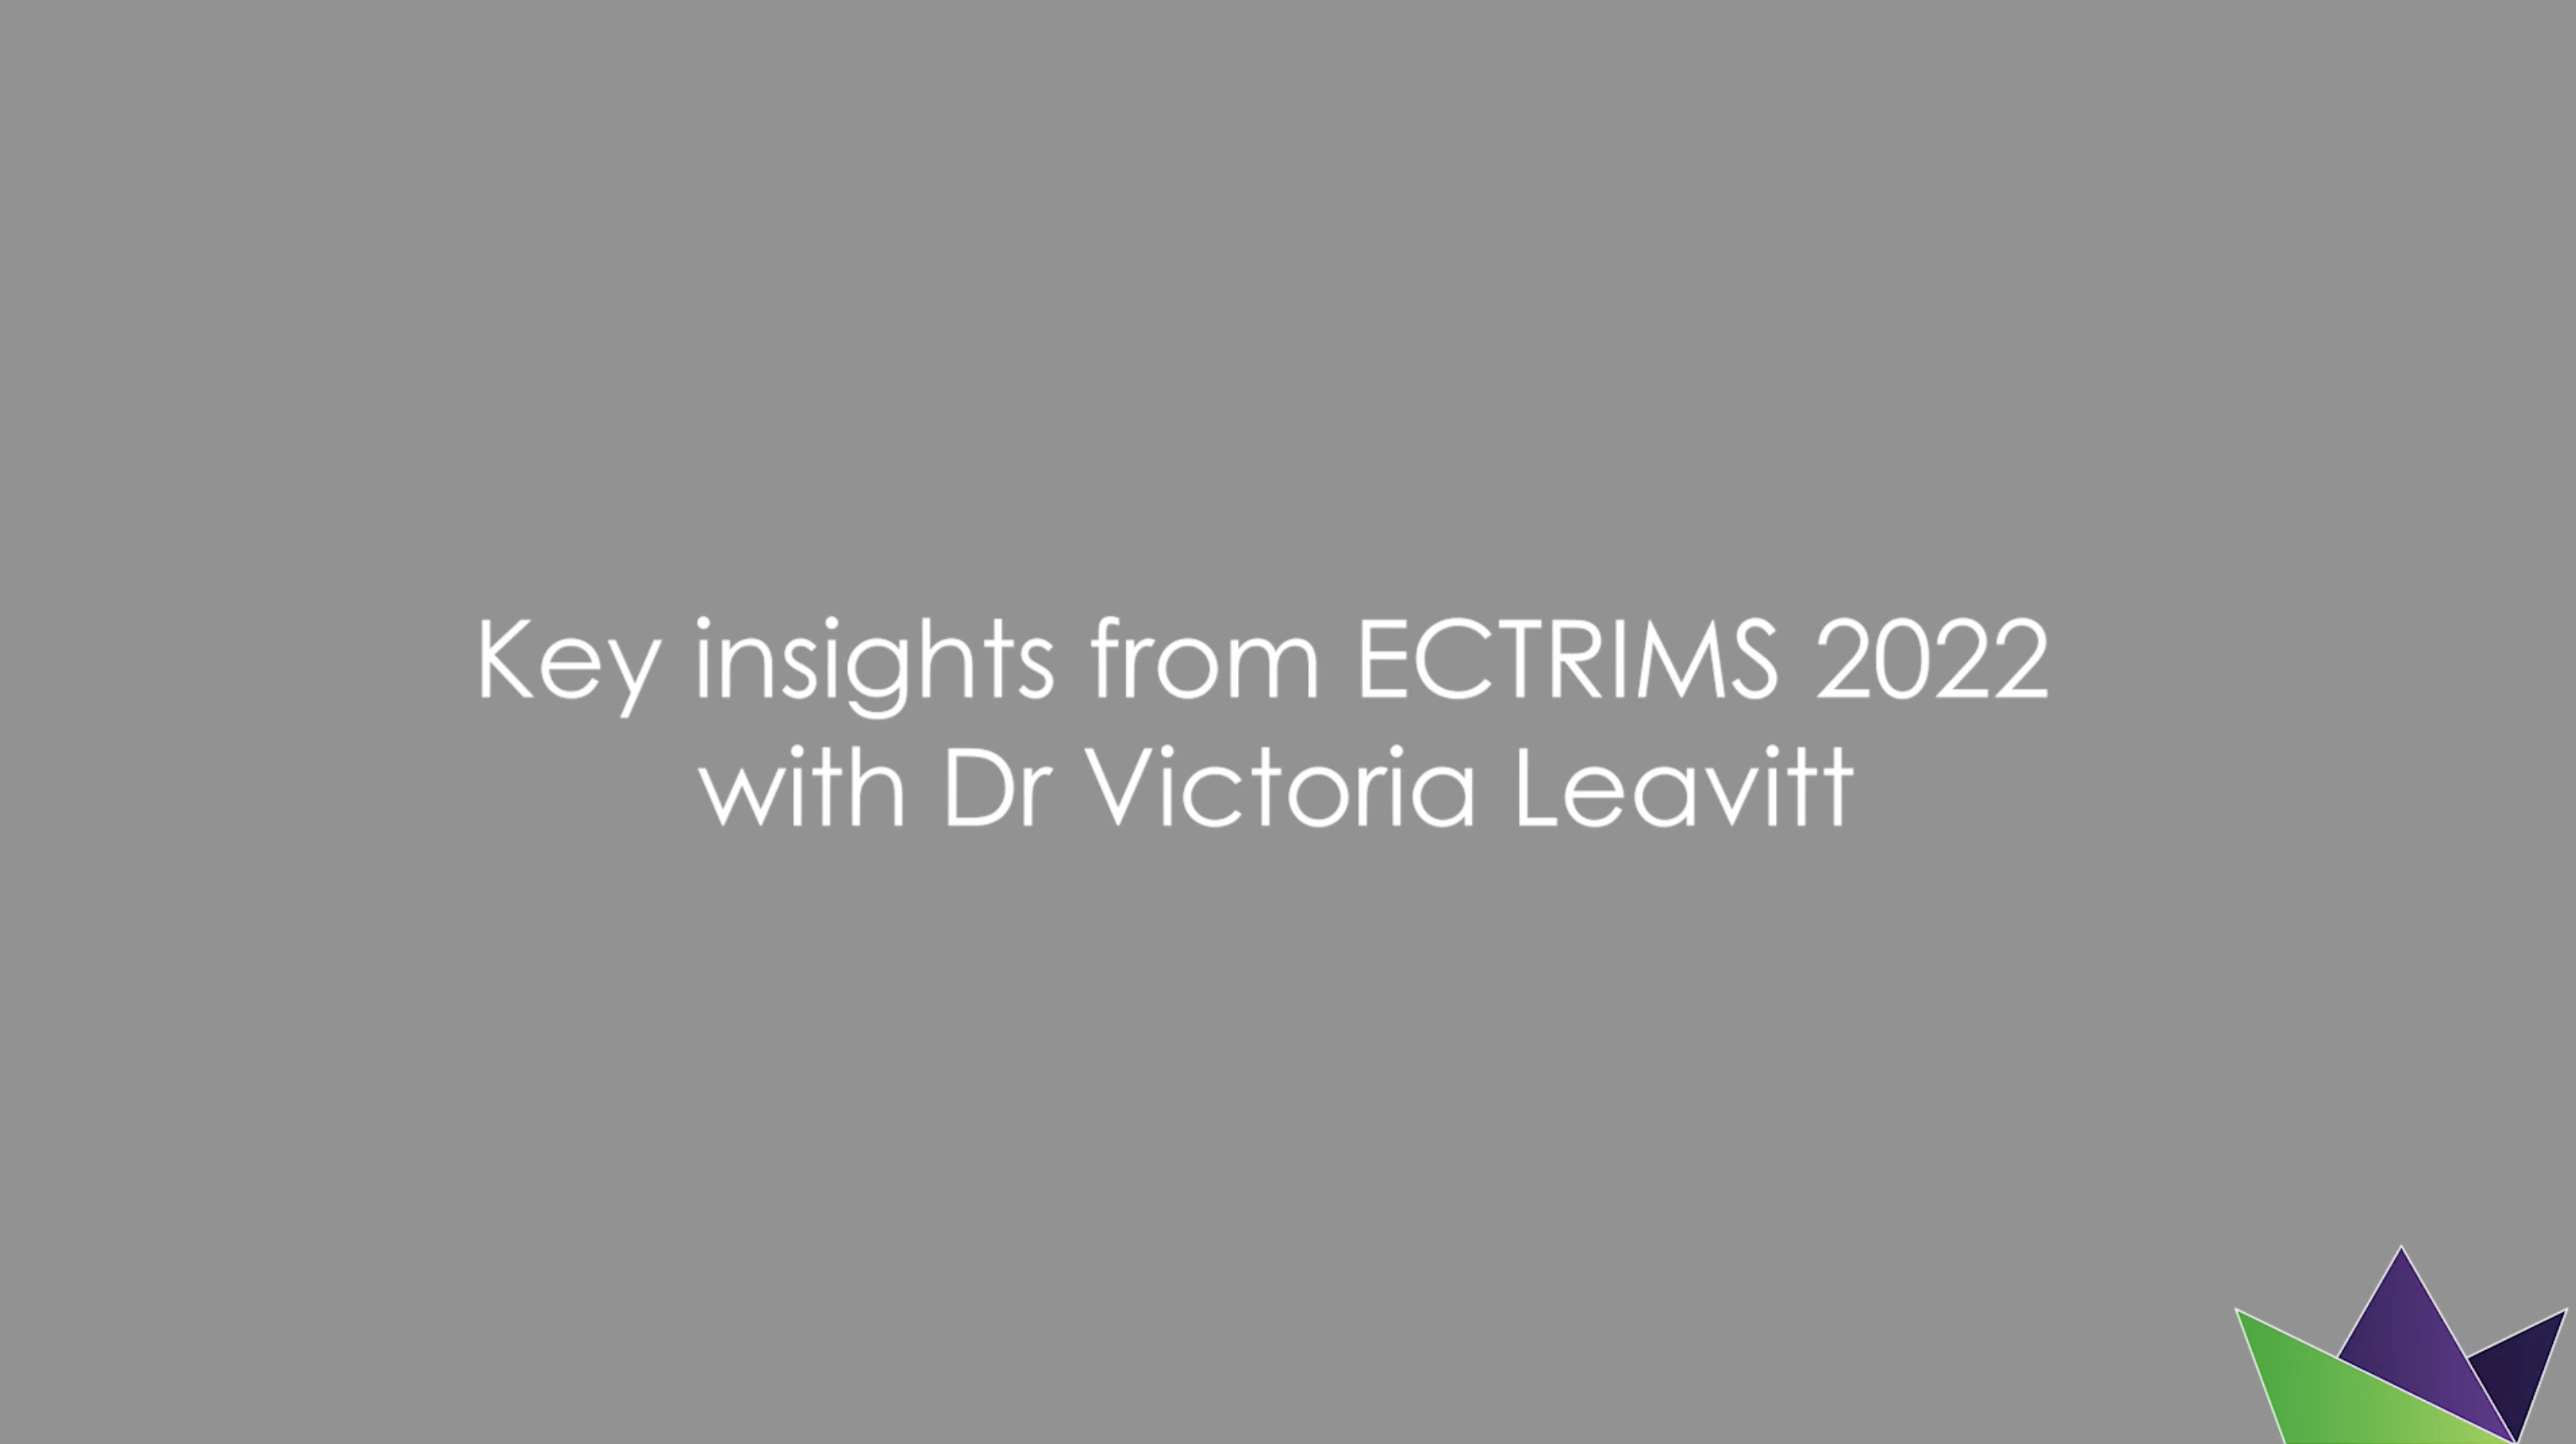 Key insights from ECTRIMS 2022 with Dr Victoria Leavitt